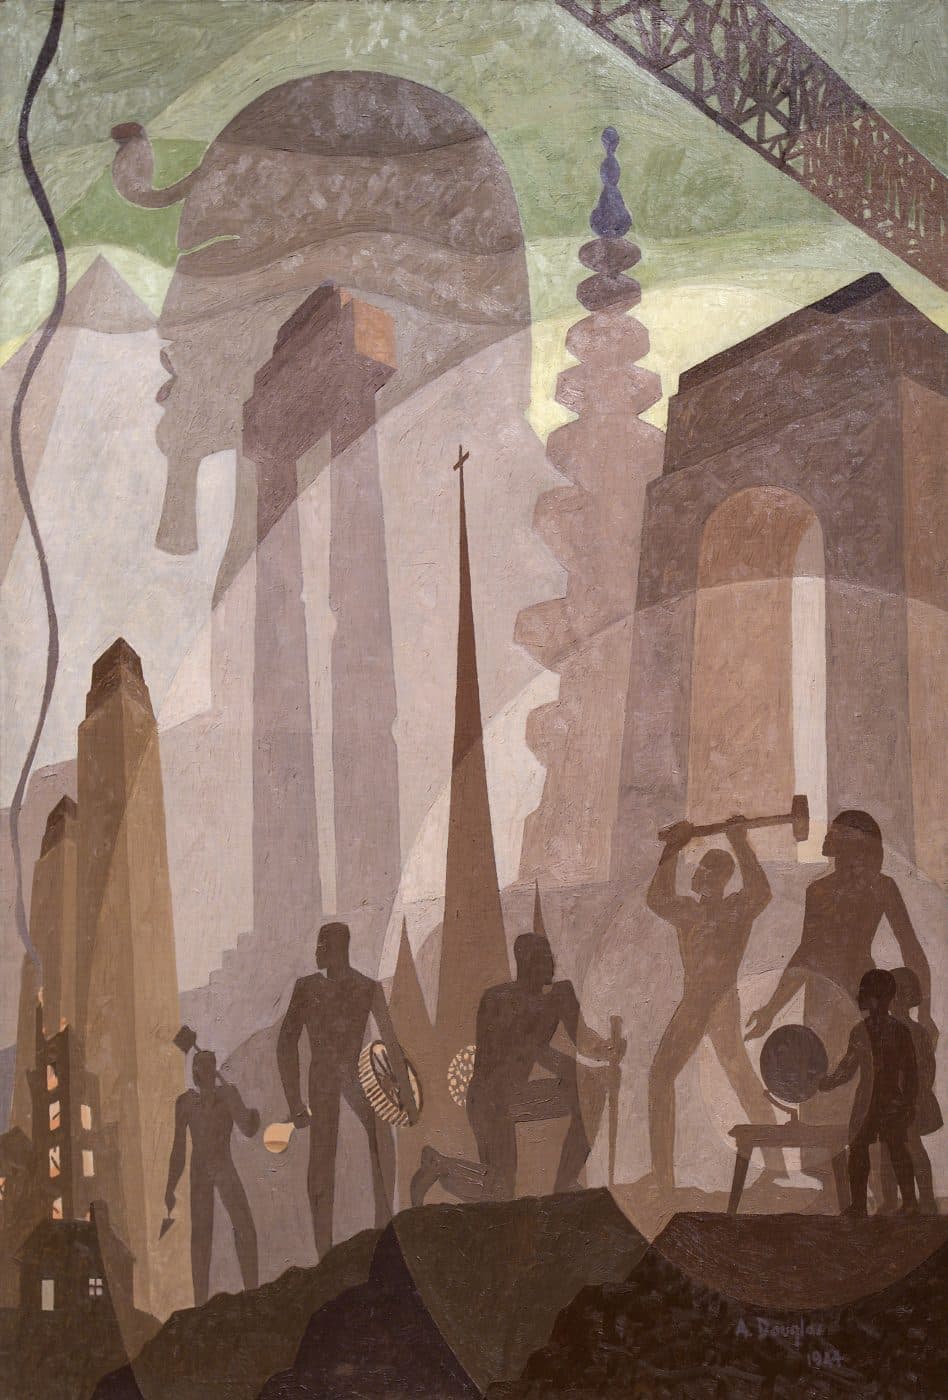 Building More Stately Mansions, 1944, by Aaron Douglas